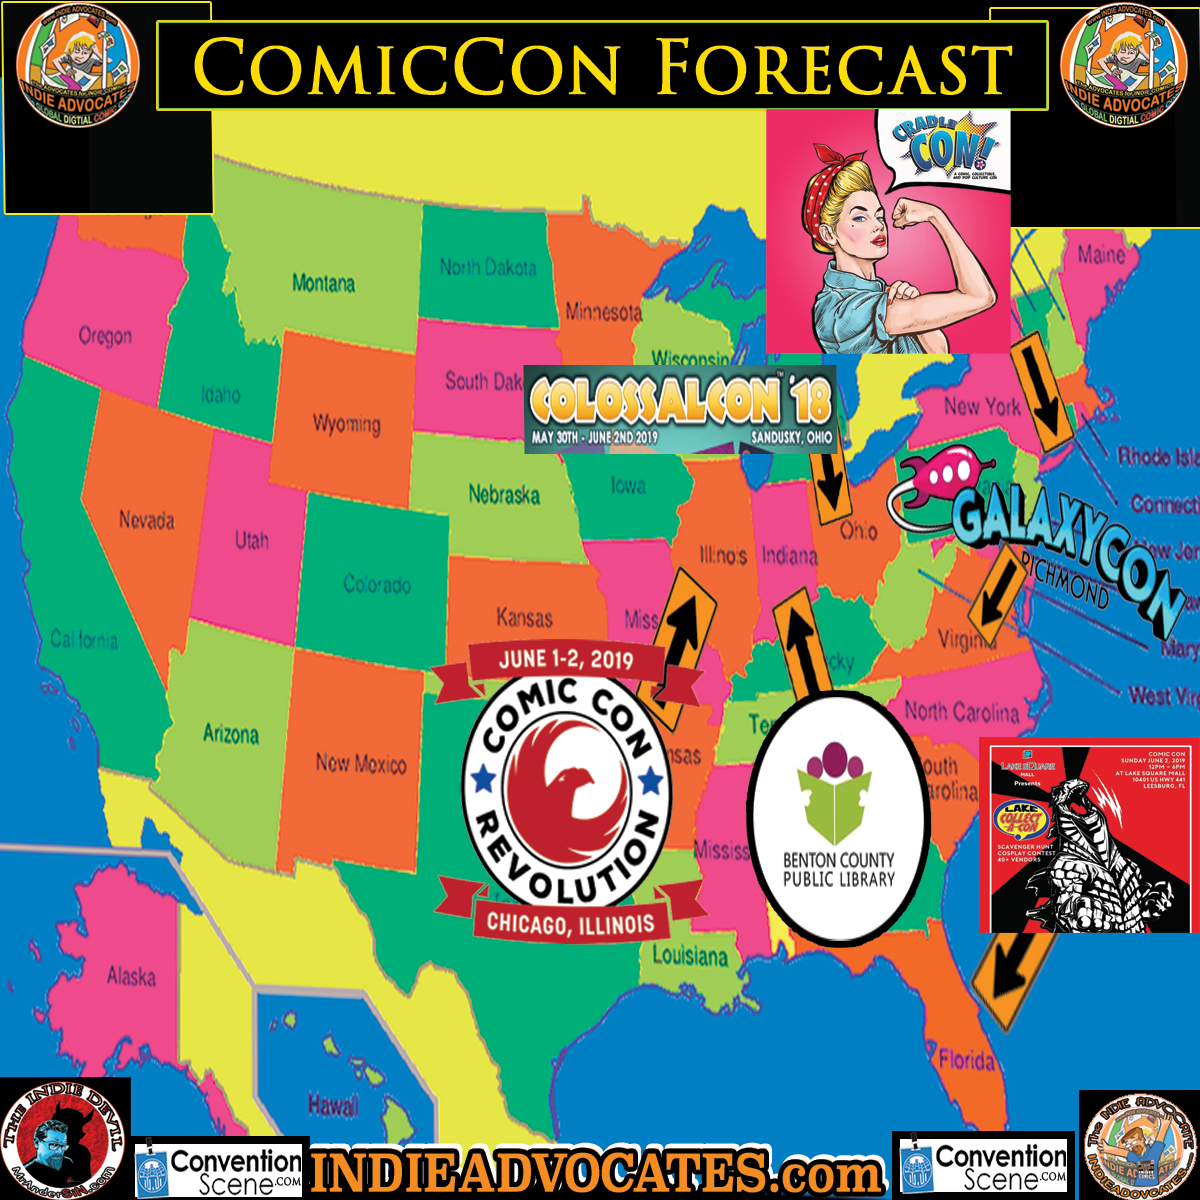 THE COMIC CON  FORECAST:: May 30th-June 2nd: